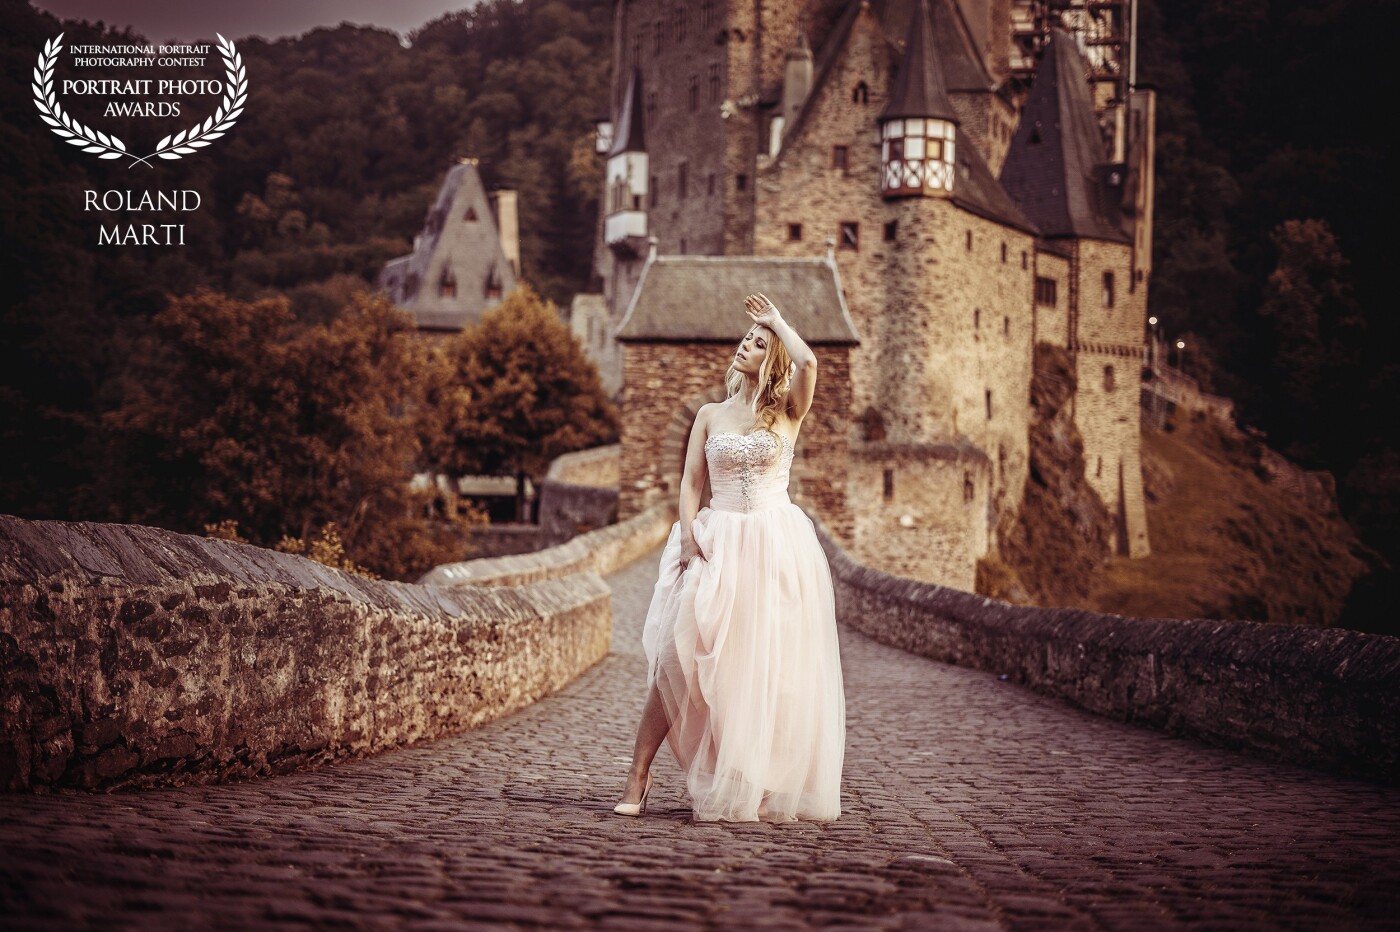 This picture was taken 2018 during the Shooting Days in Germany. It was an amazing Location! <br />
<br />
Photographer: @roland_marti_photography<br />
Model: @coryangel<br />
Location: Eltz Castle<br />
